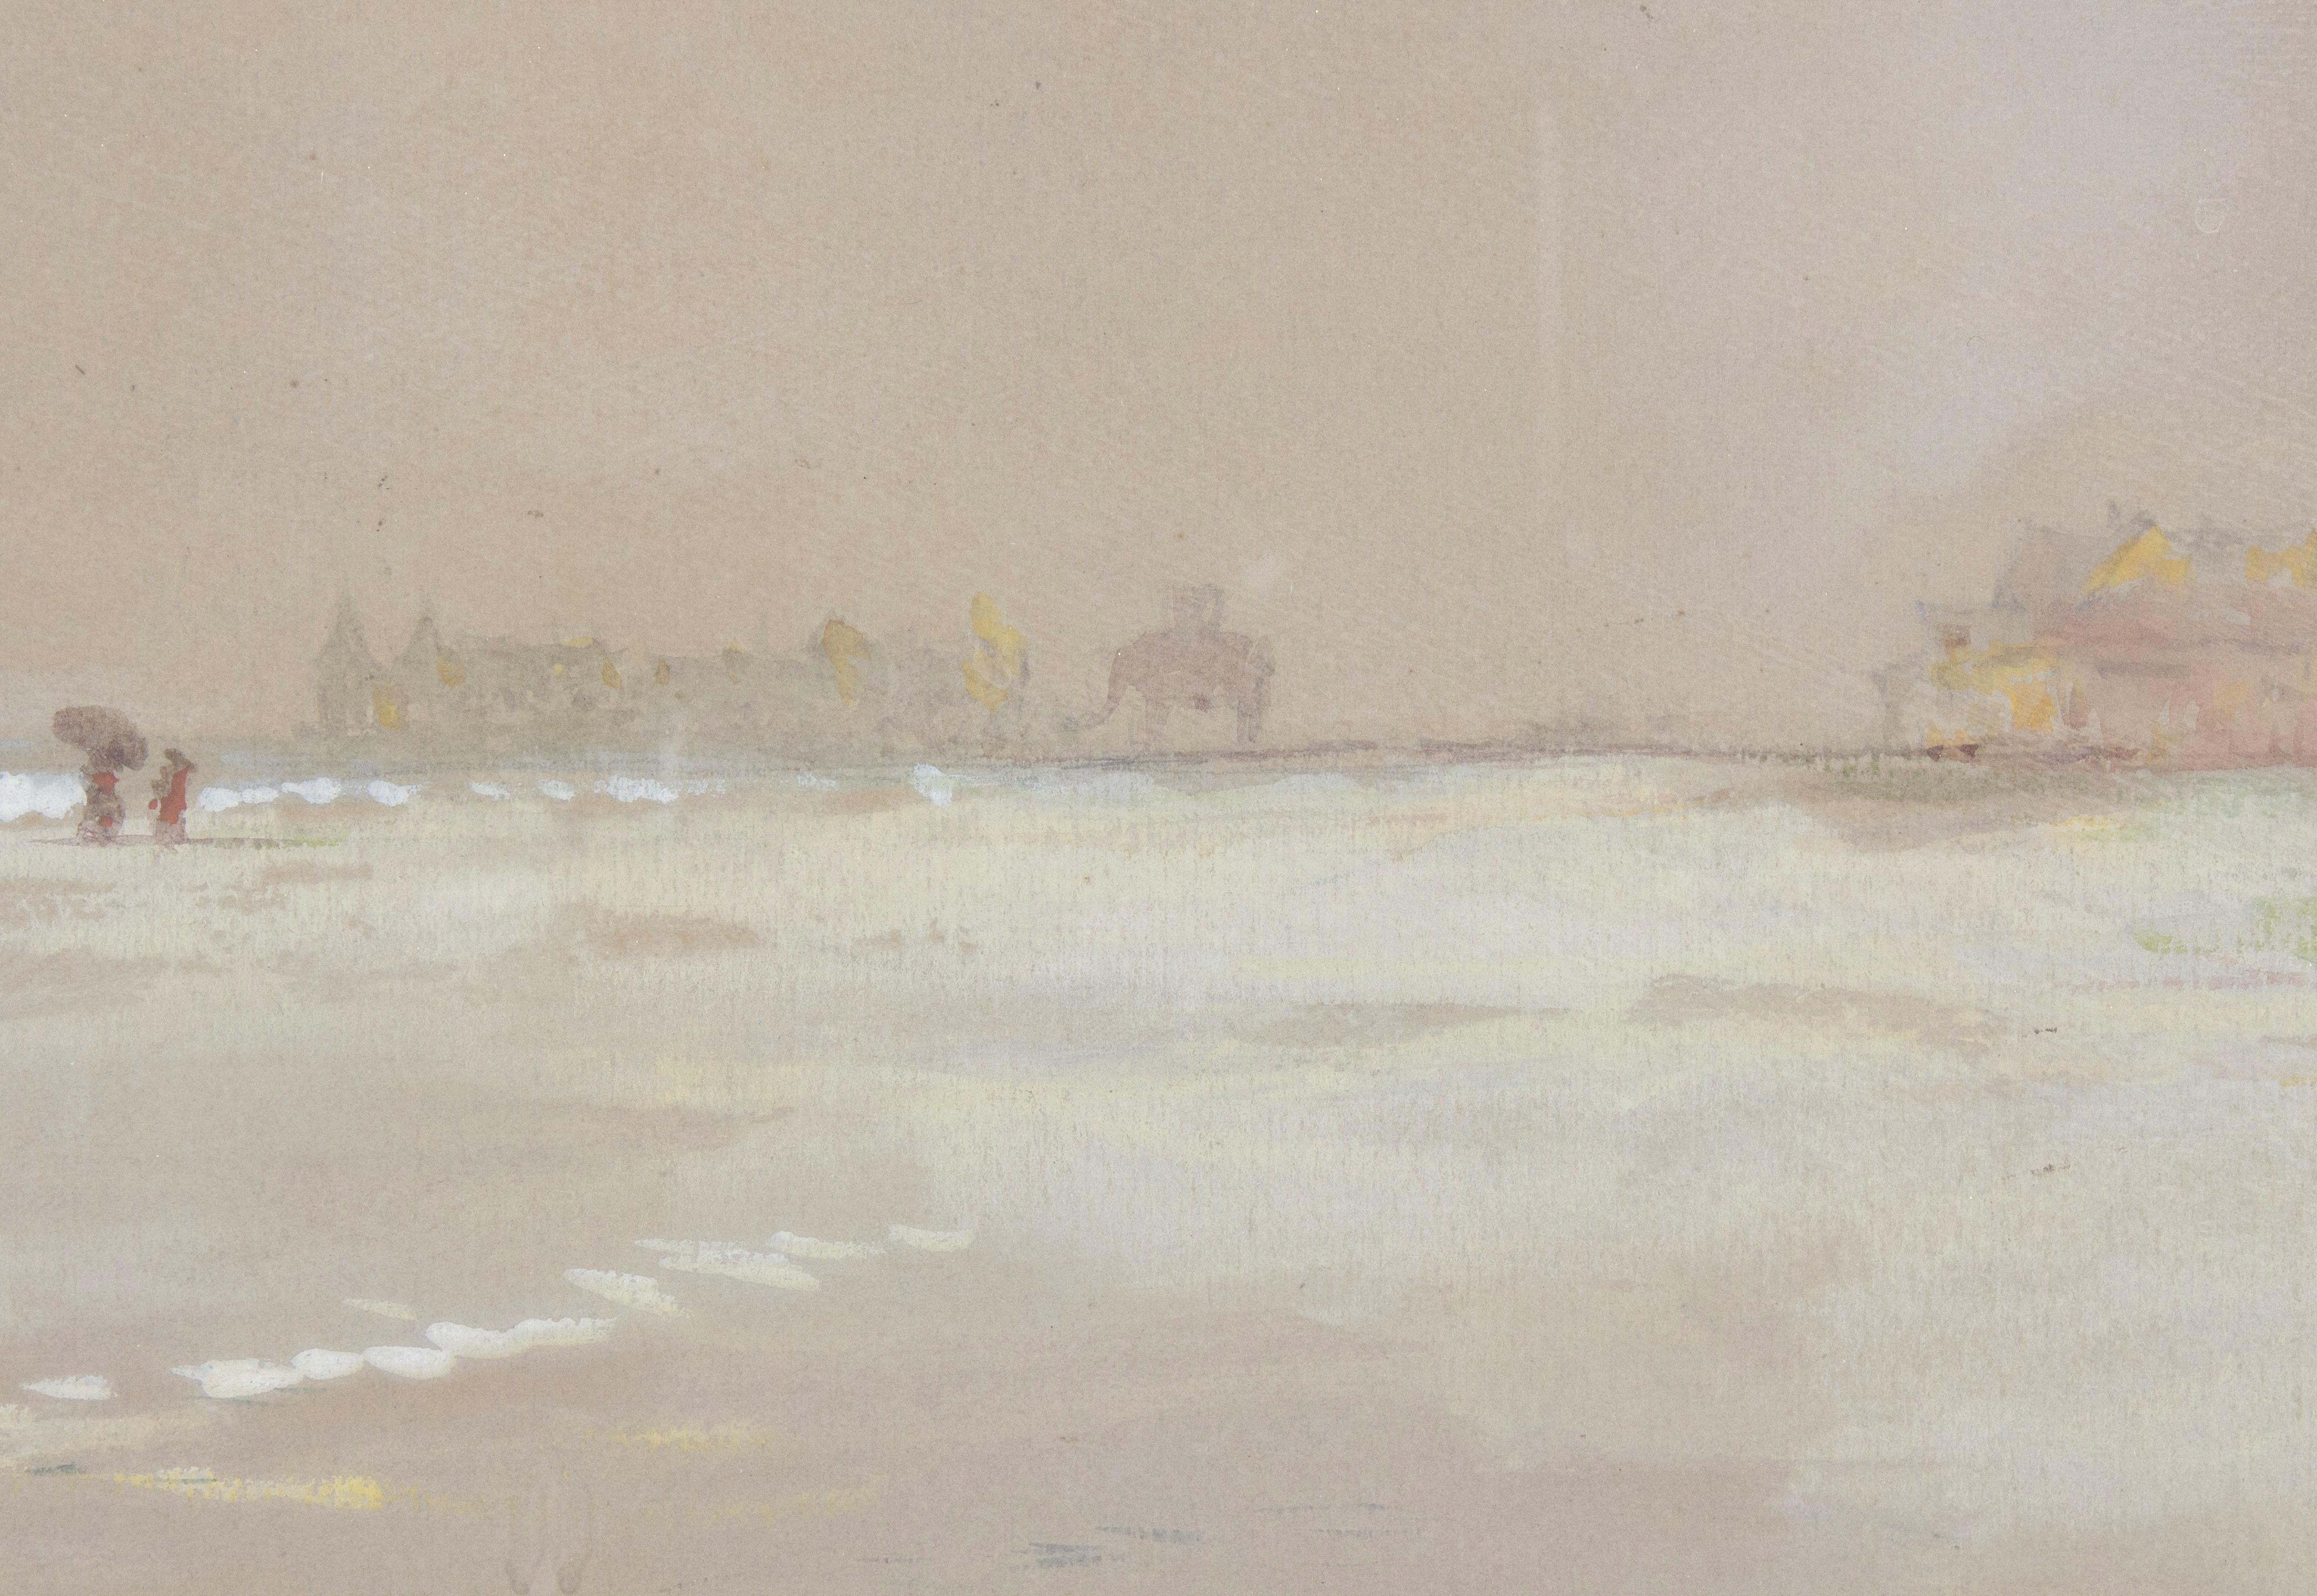 Watercolor of Atlantic City Beach with Lucy the Elephant By E.D. Lewis - Realist Art by Edmund Darch Lewis